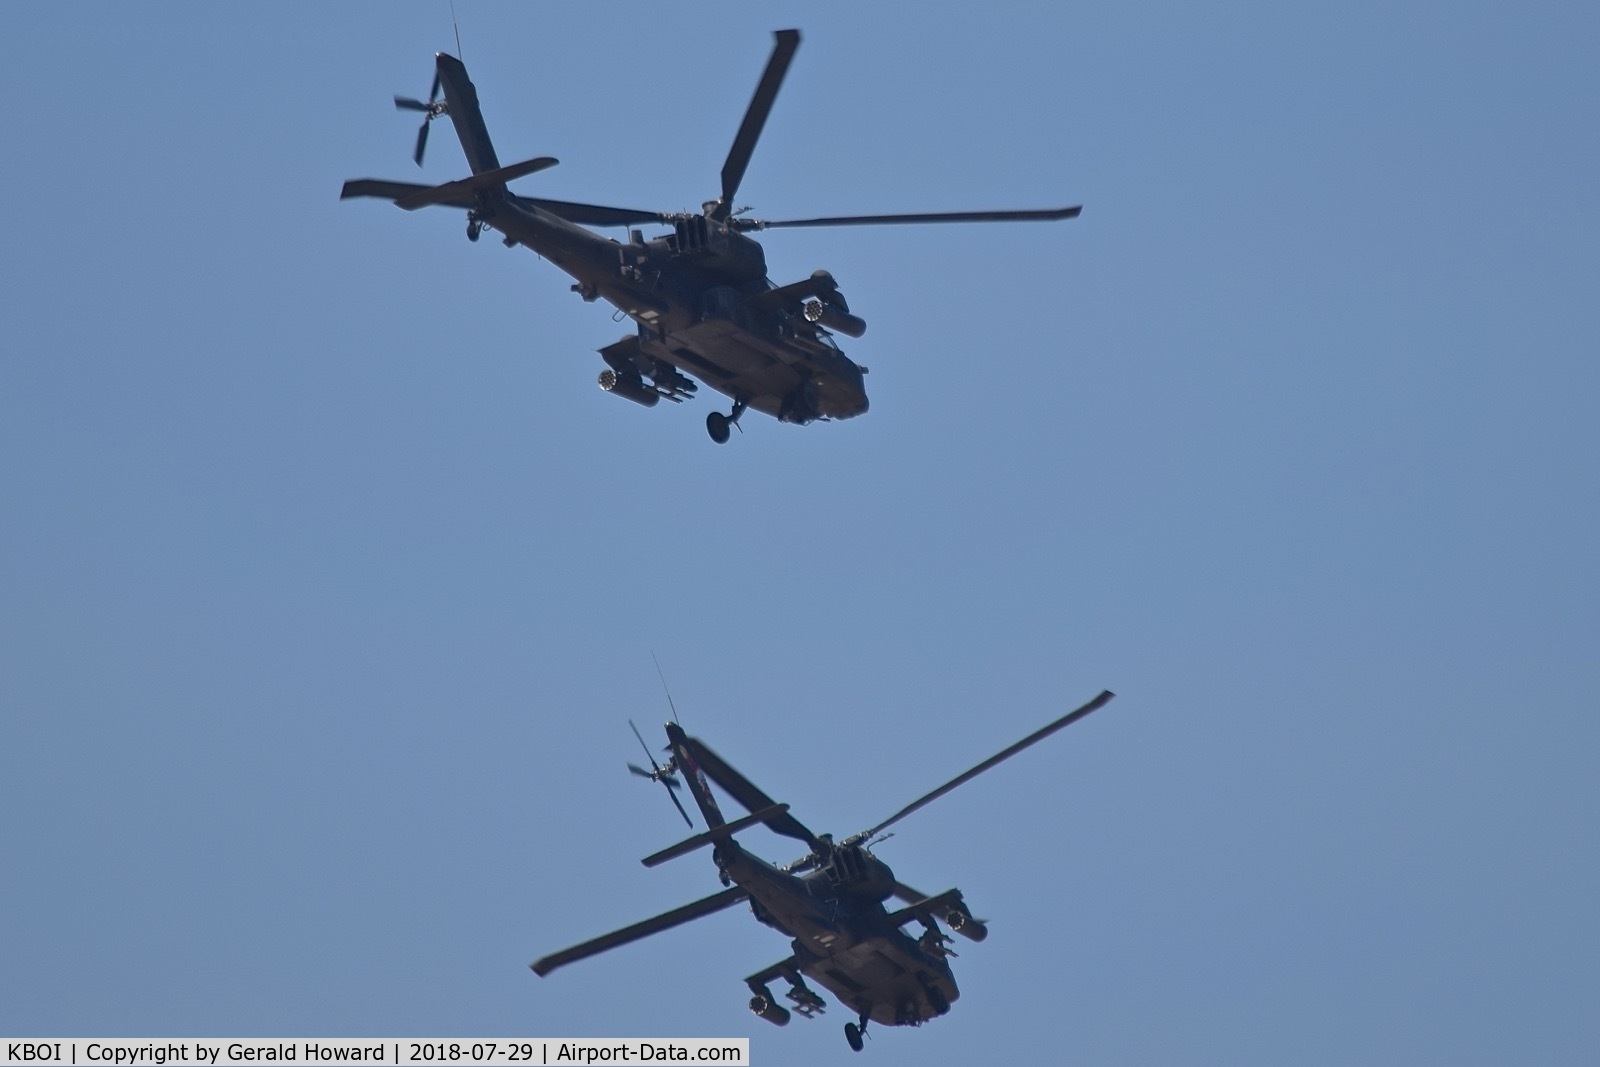 Boise Air Terminal/gowen Fld Airport (BOI) - Two AH-64s from the Royal Singapore Air Force
departing on a training mission.
